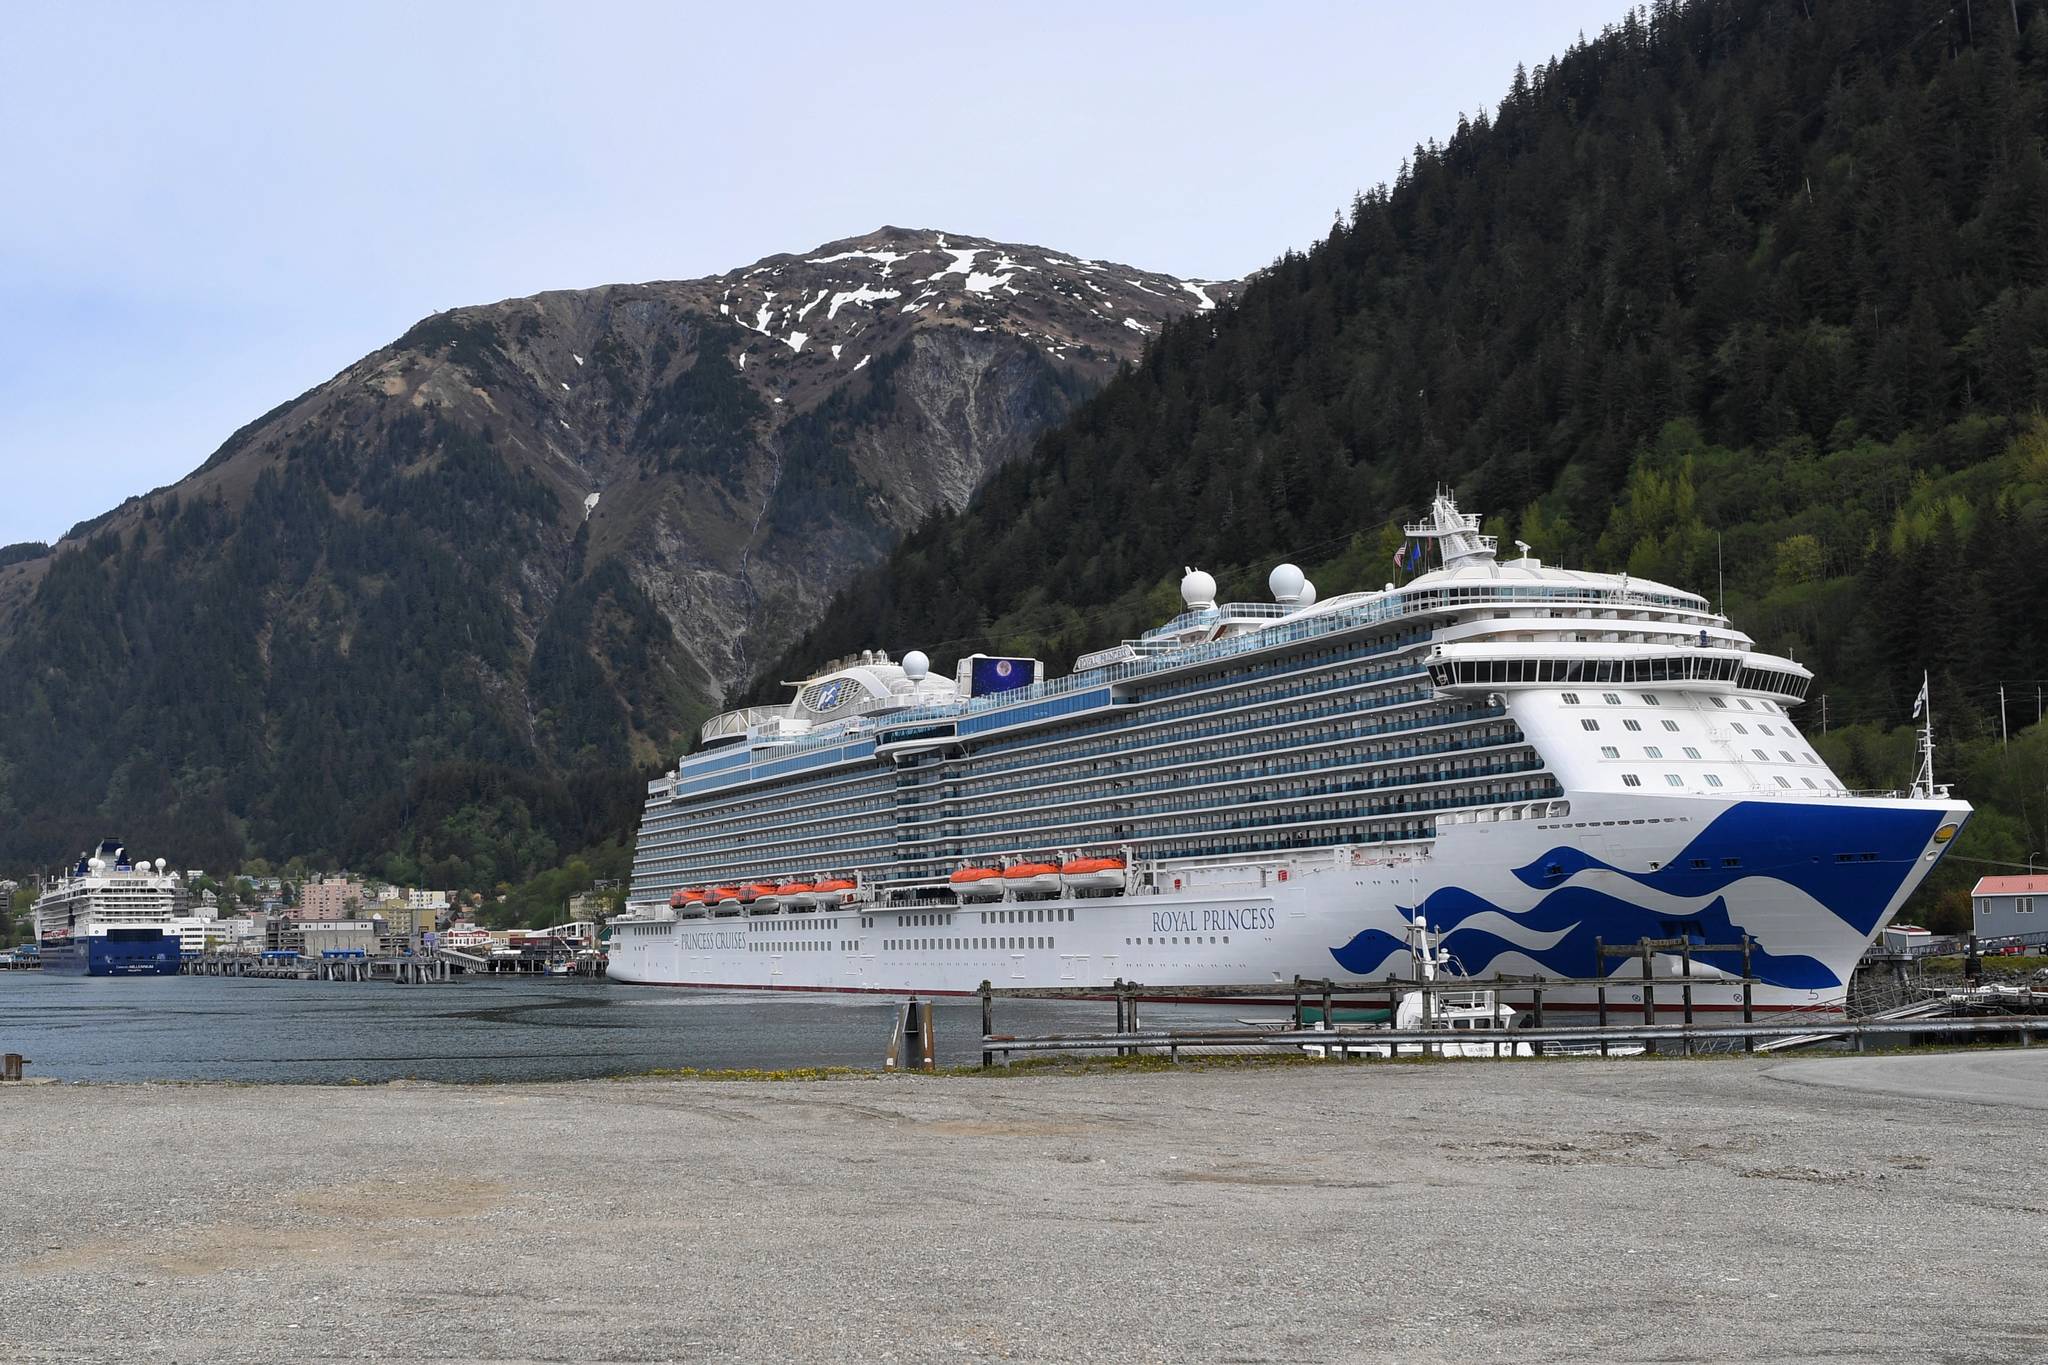 The Royal Princess at the South Franklin Dock on Tuesday, May 14, 2019. (Michael Penn | Juneau Empire)